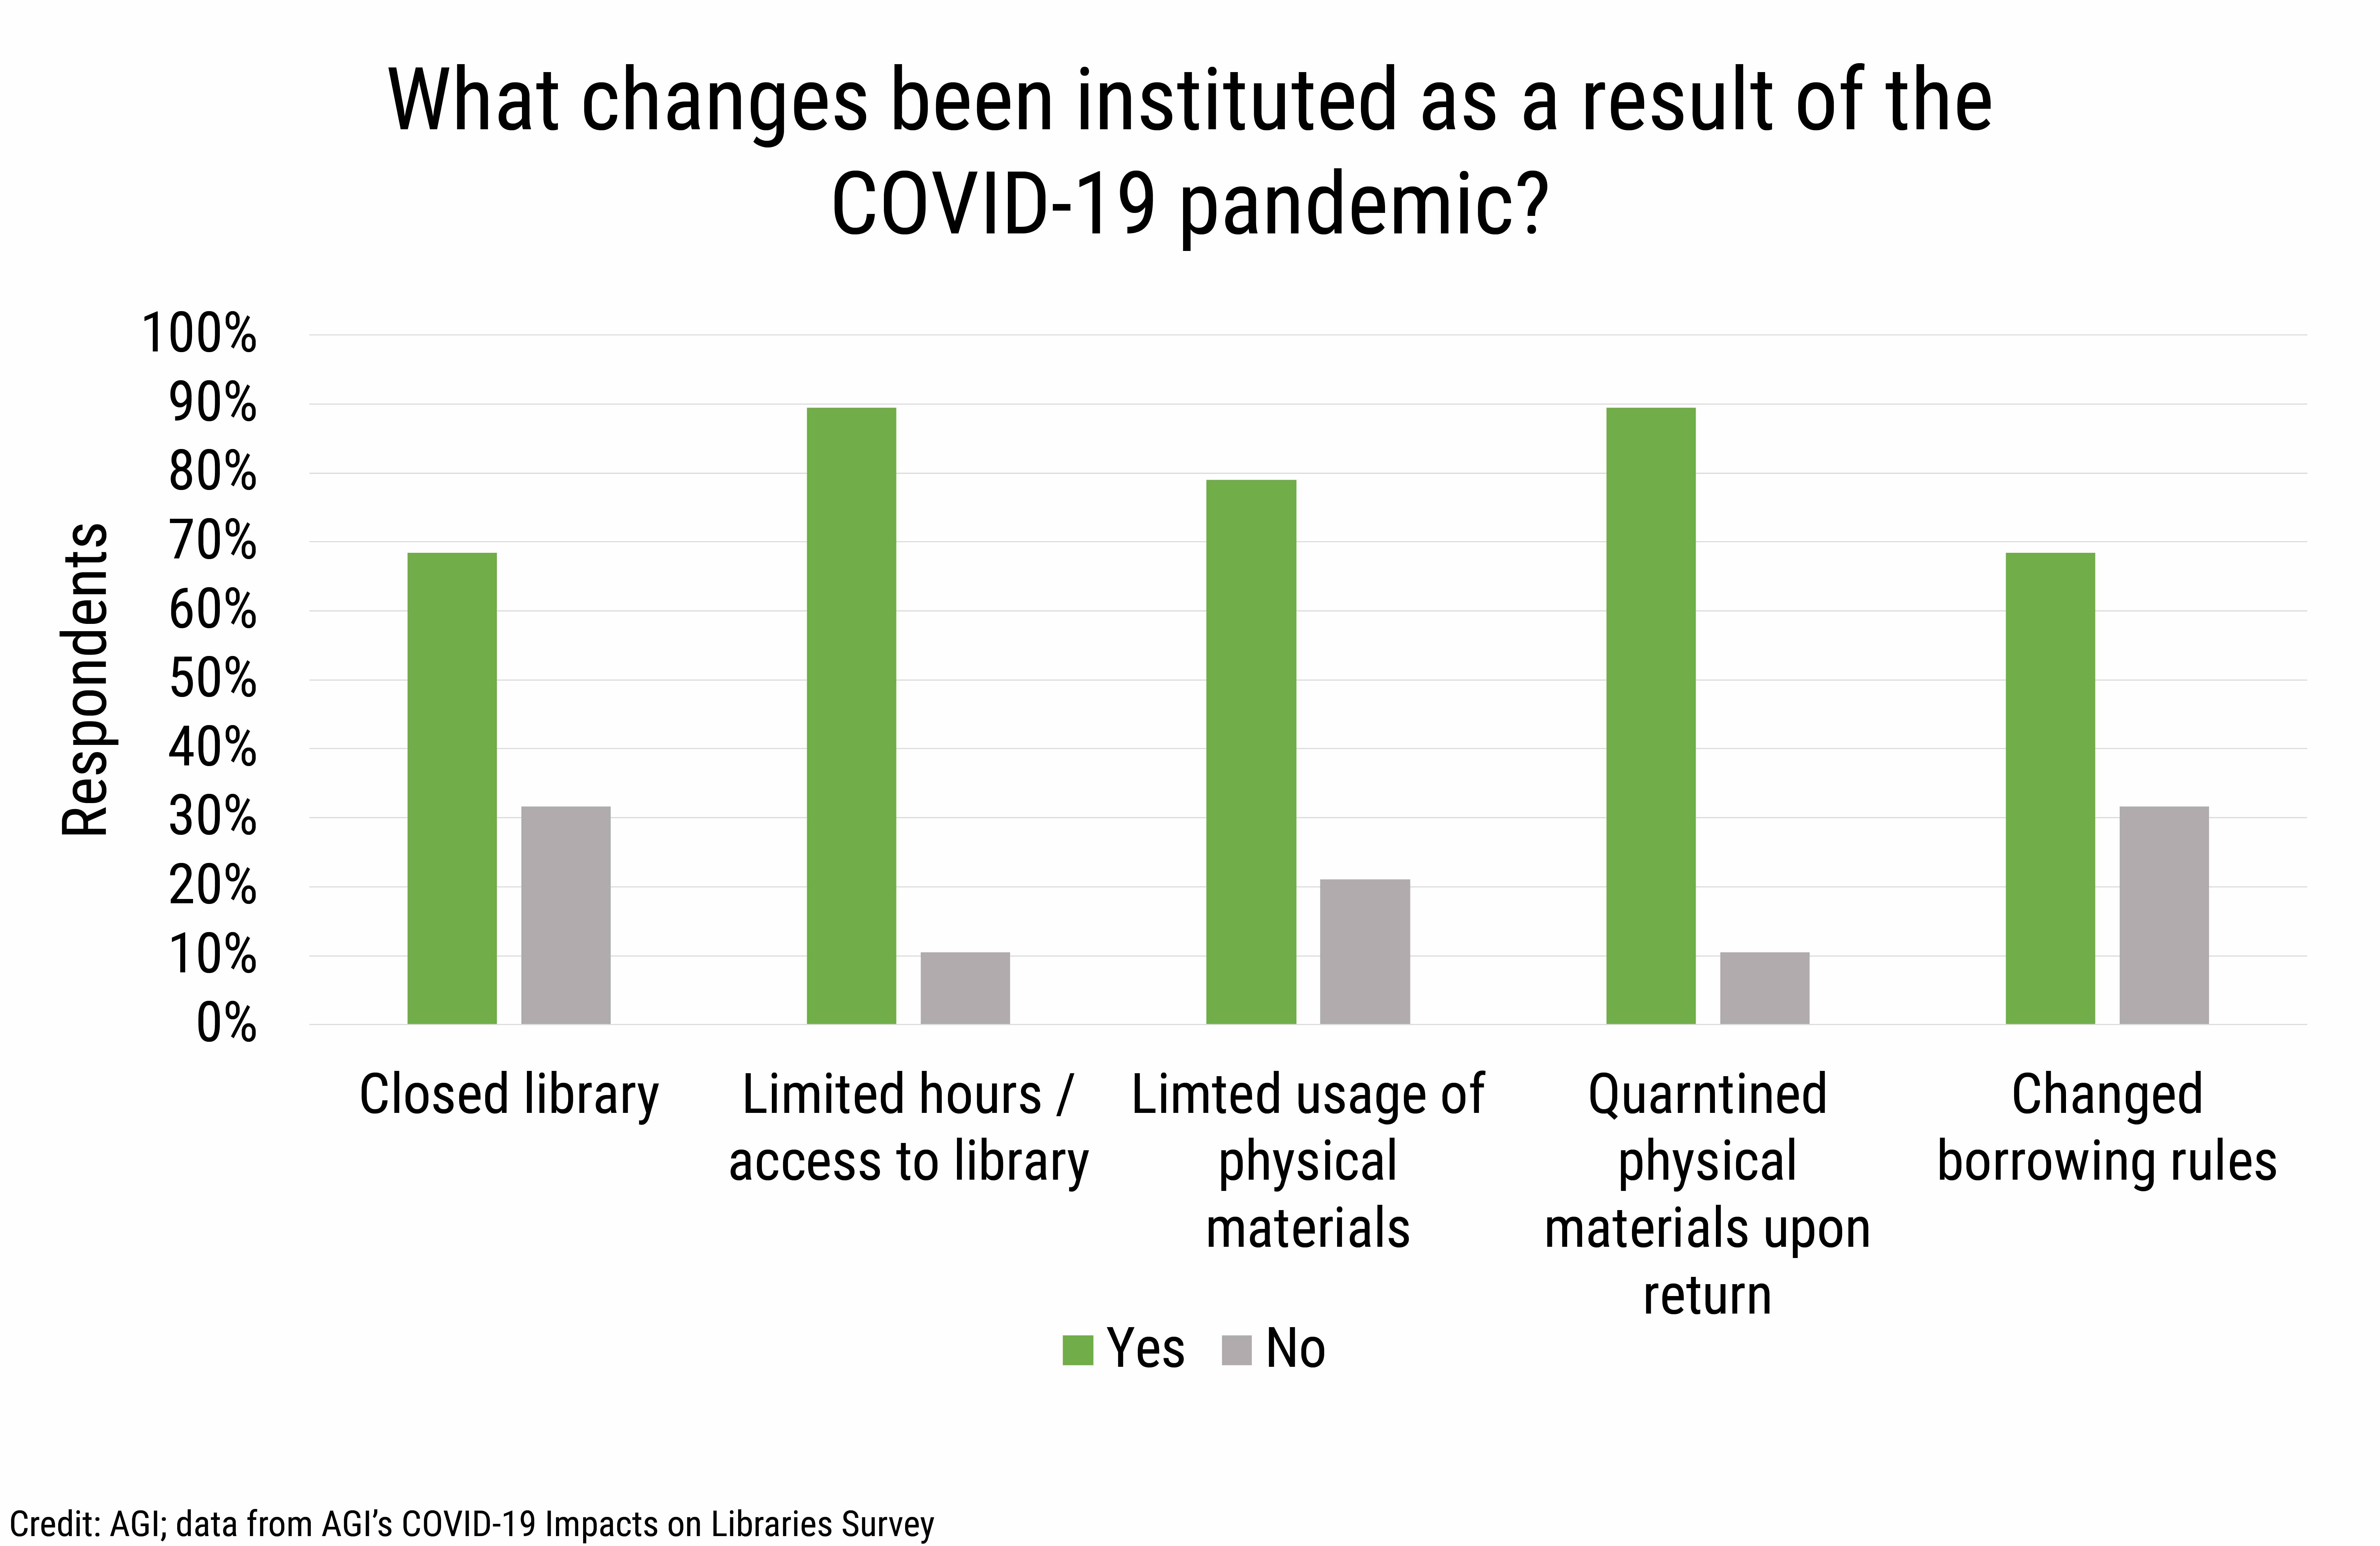 DB_2020-030_chart02 Facility changes to libraries during COVID-19. (Credit: AGI, data from AGI's COVID-19 Impacts on Libraries Survey)